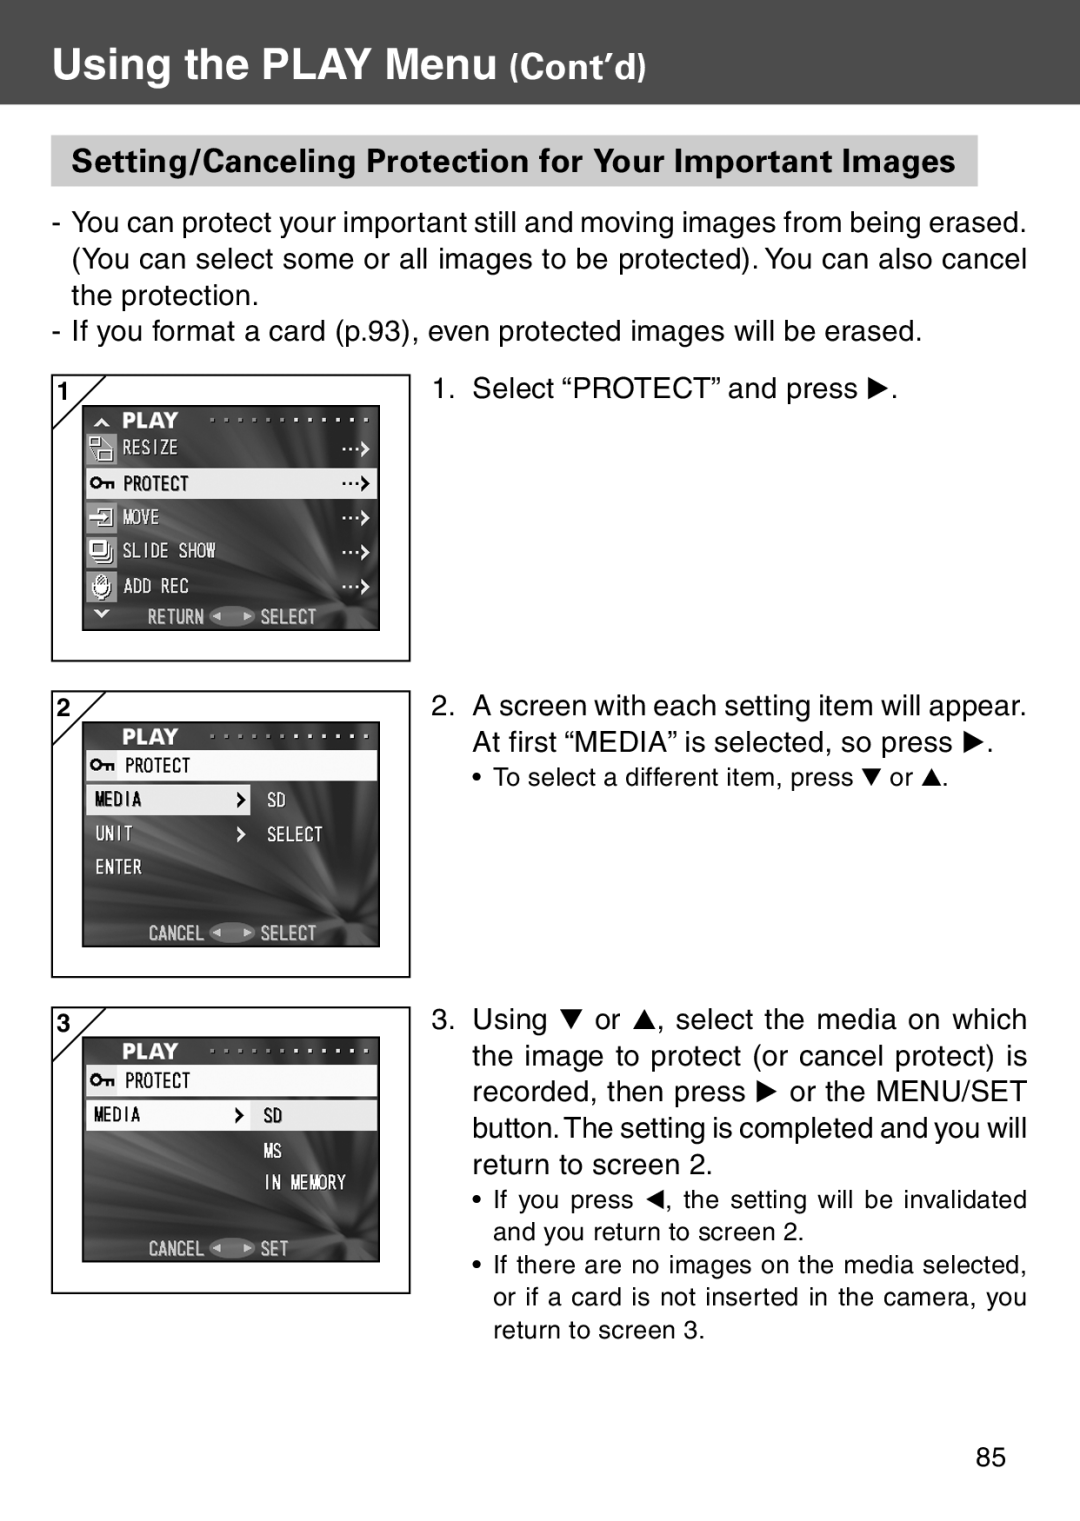 Konica Minolta KD-500Z user manual Setting/Canceling Protection for Your Important Images, Using the PLAY Menu Cont’d 